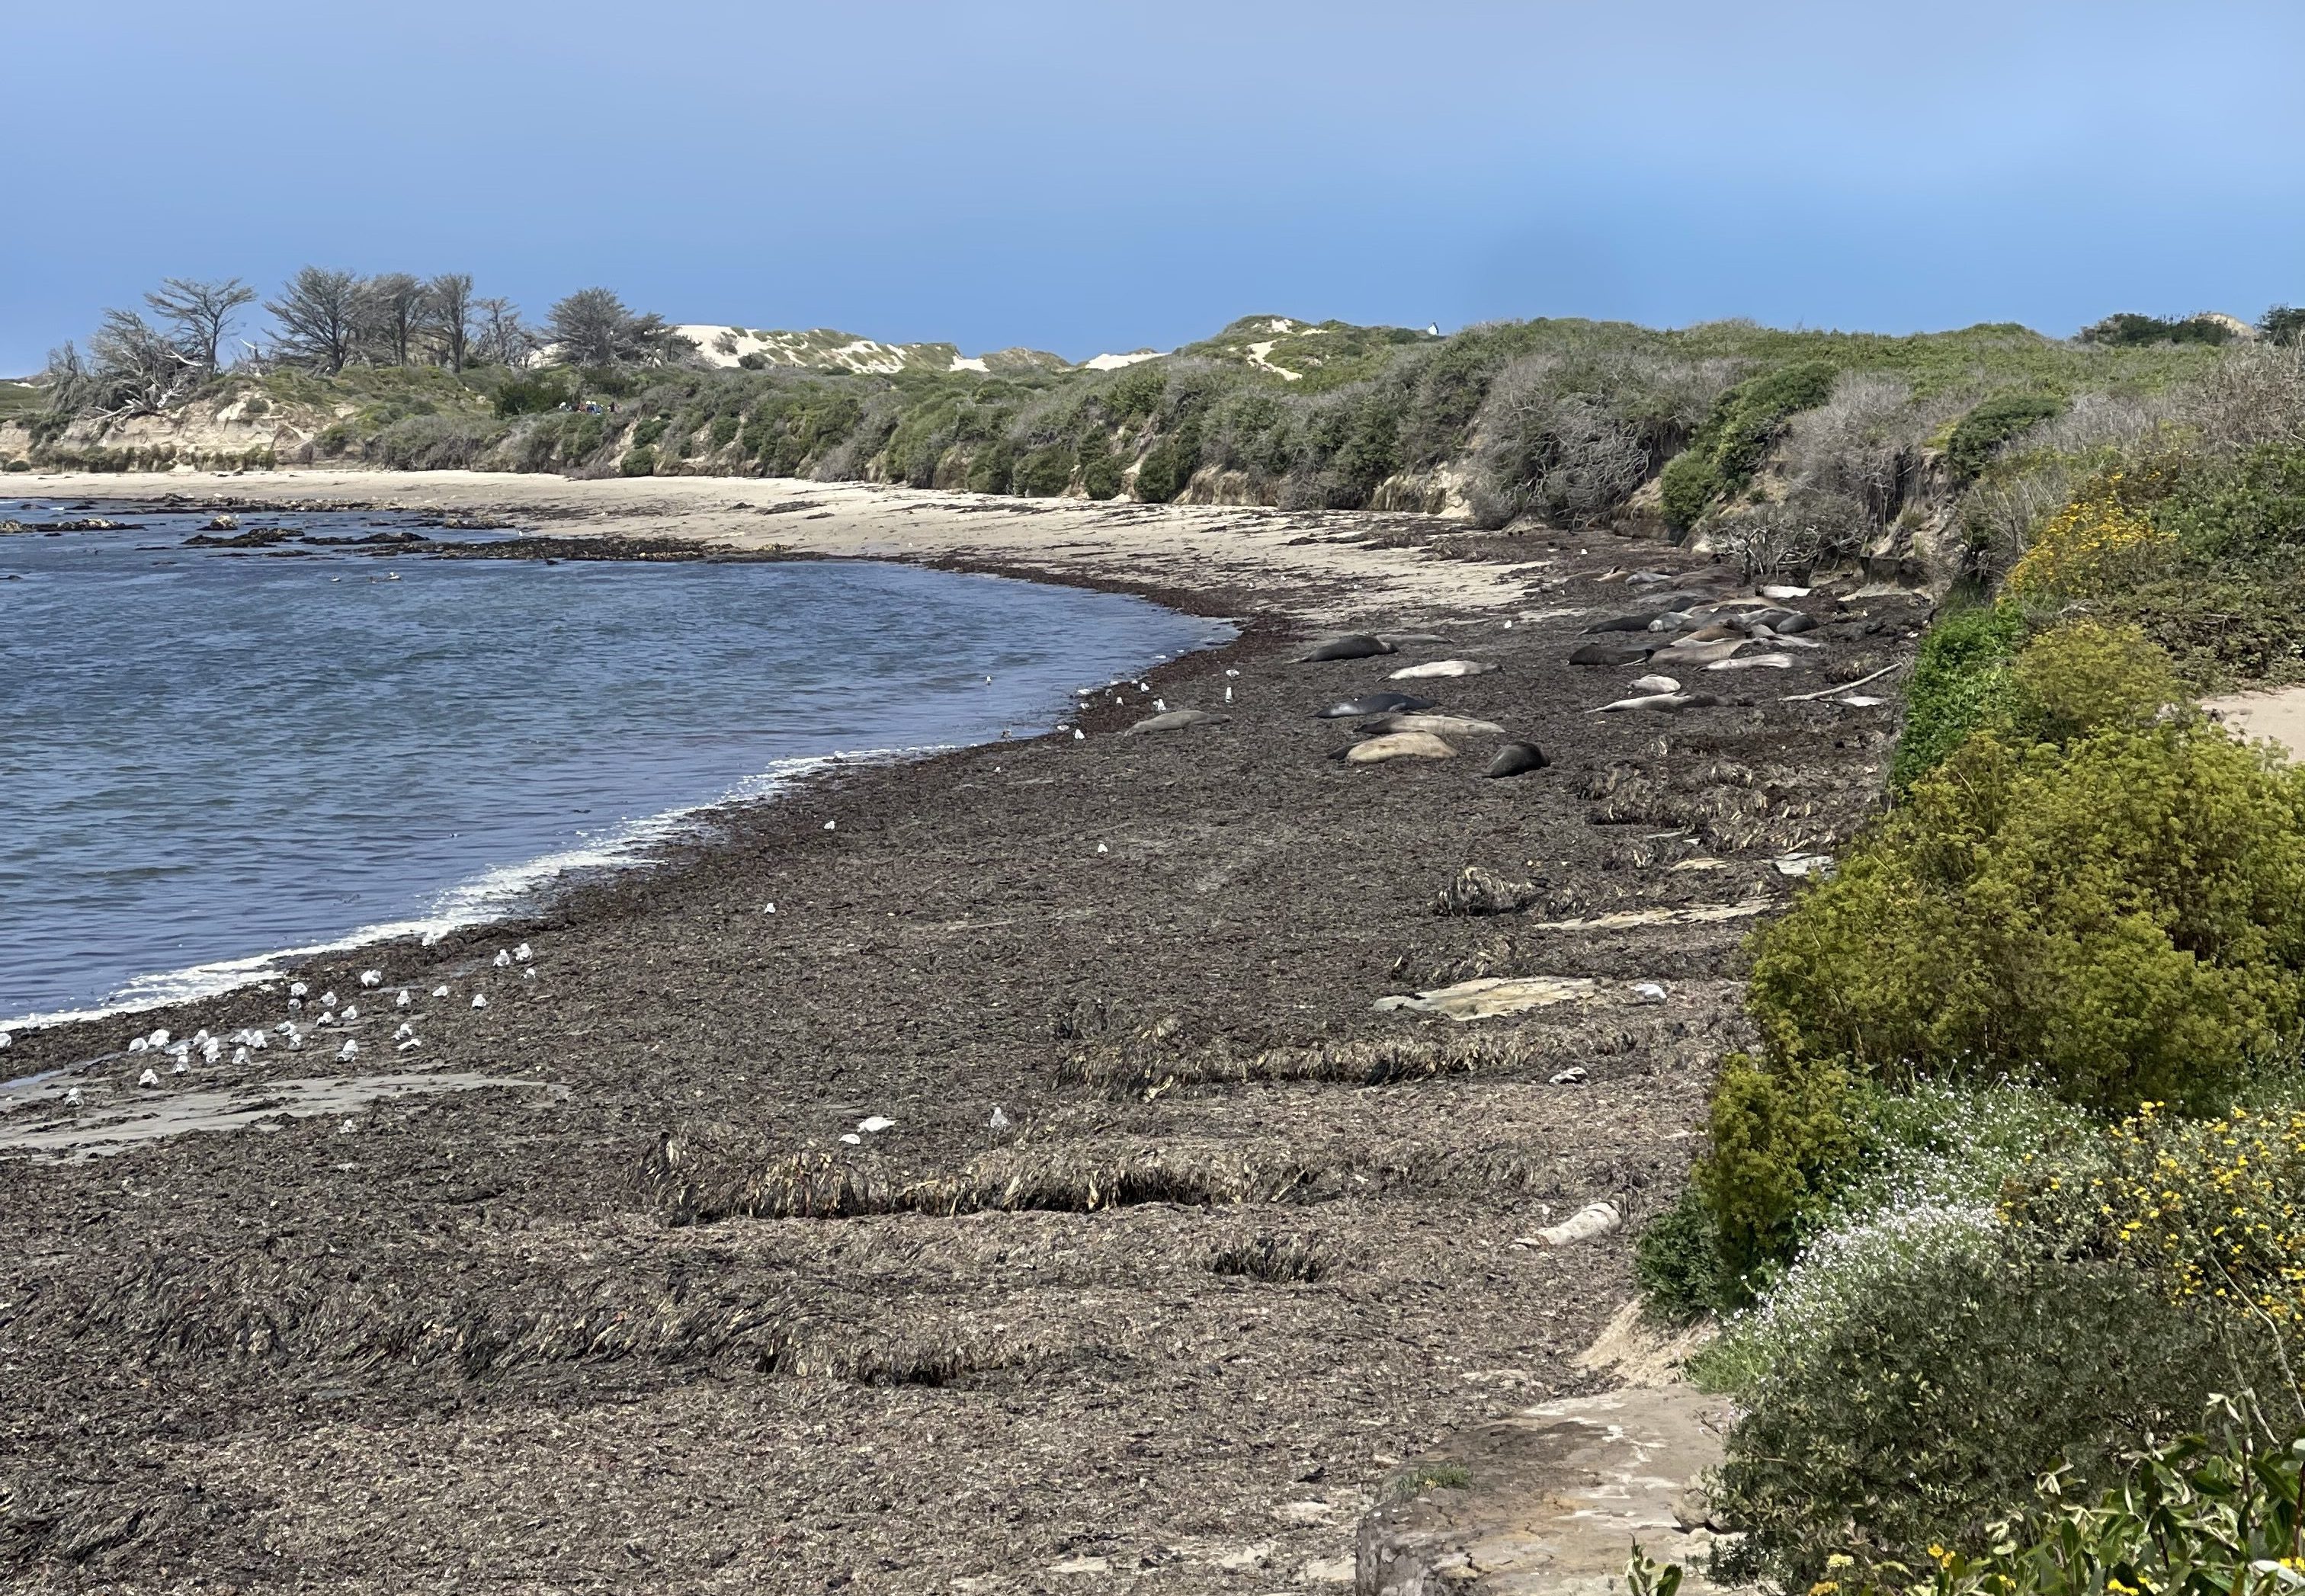 The view of the elephant seals from Bight Beach viewing area.